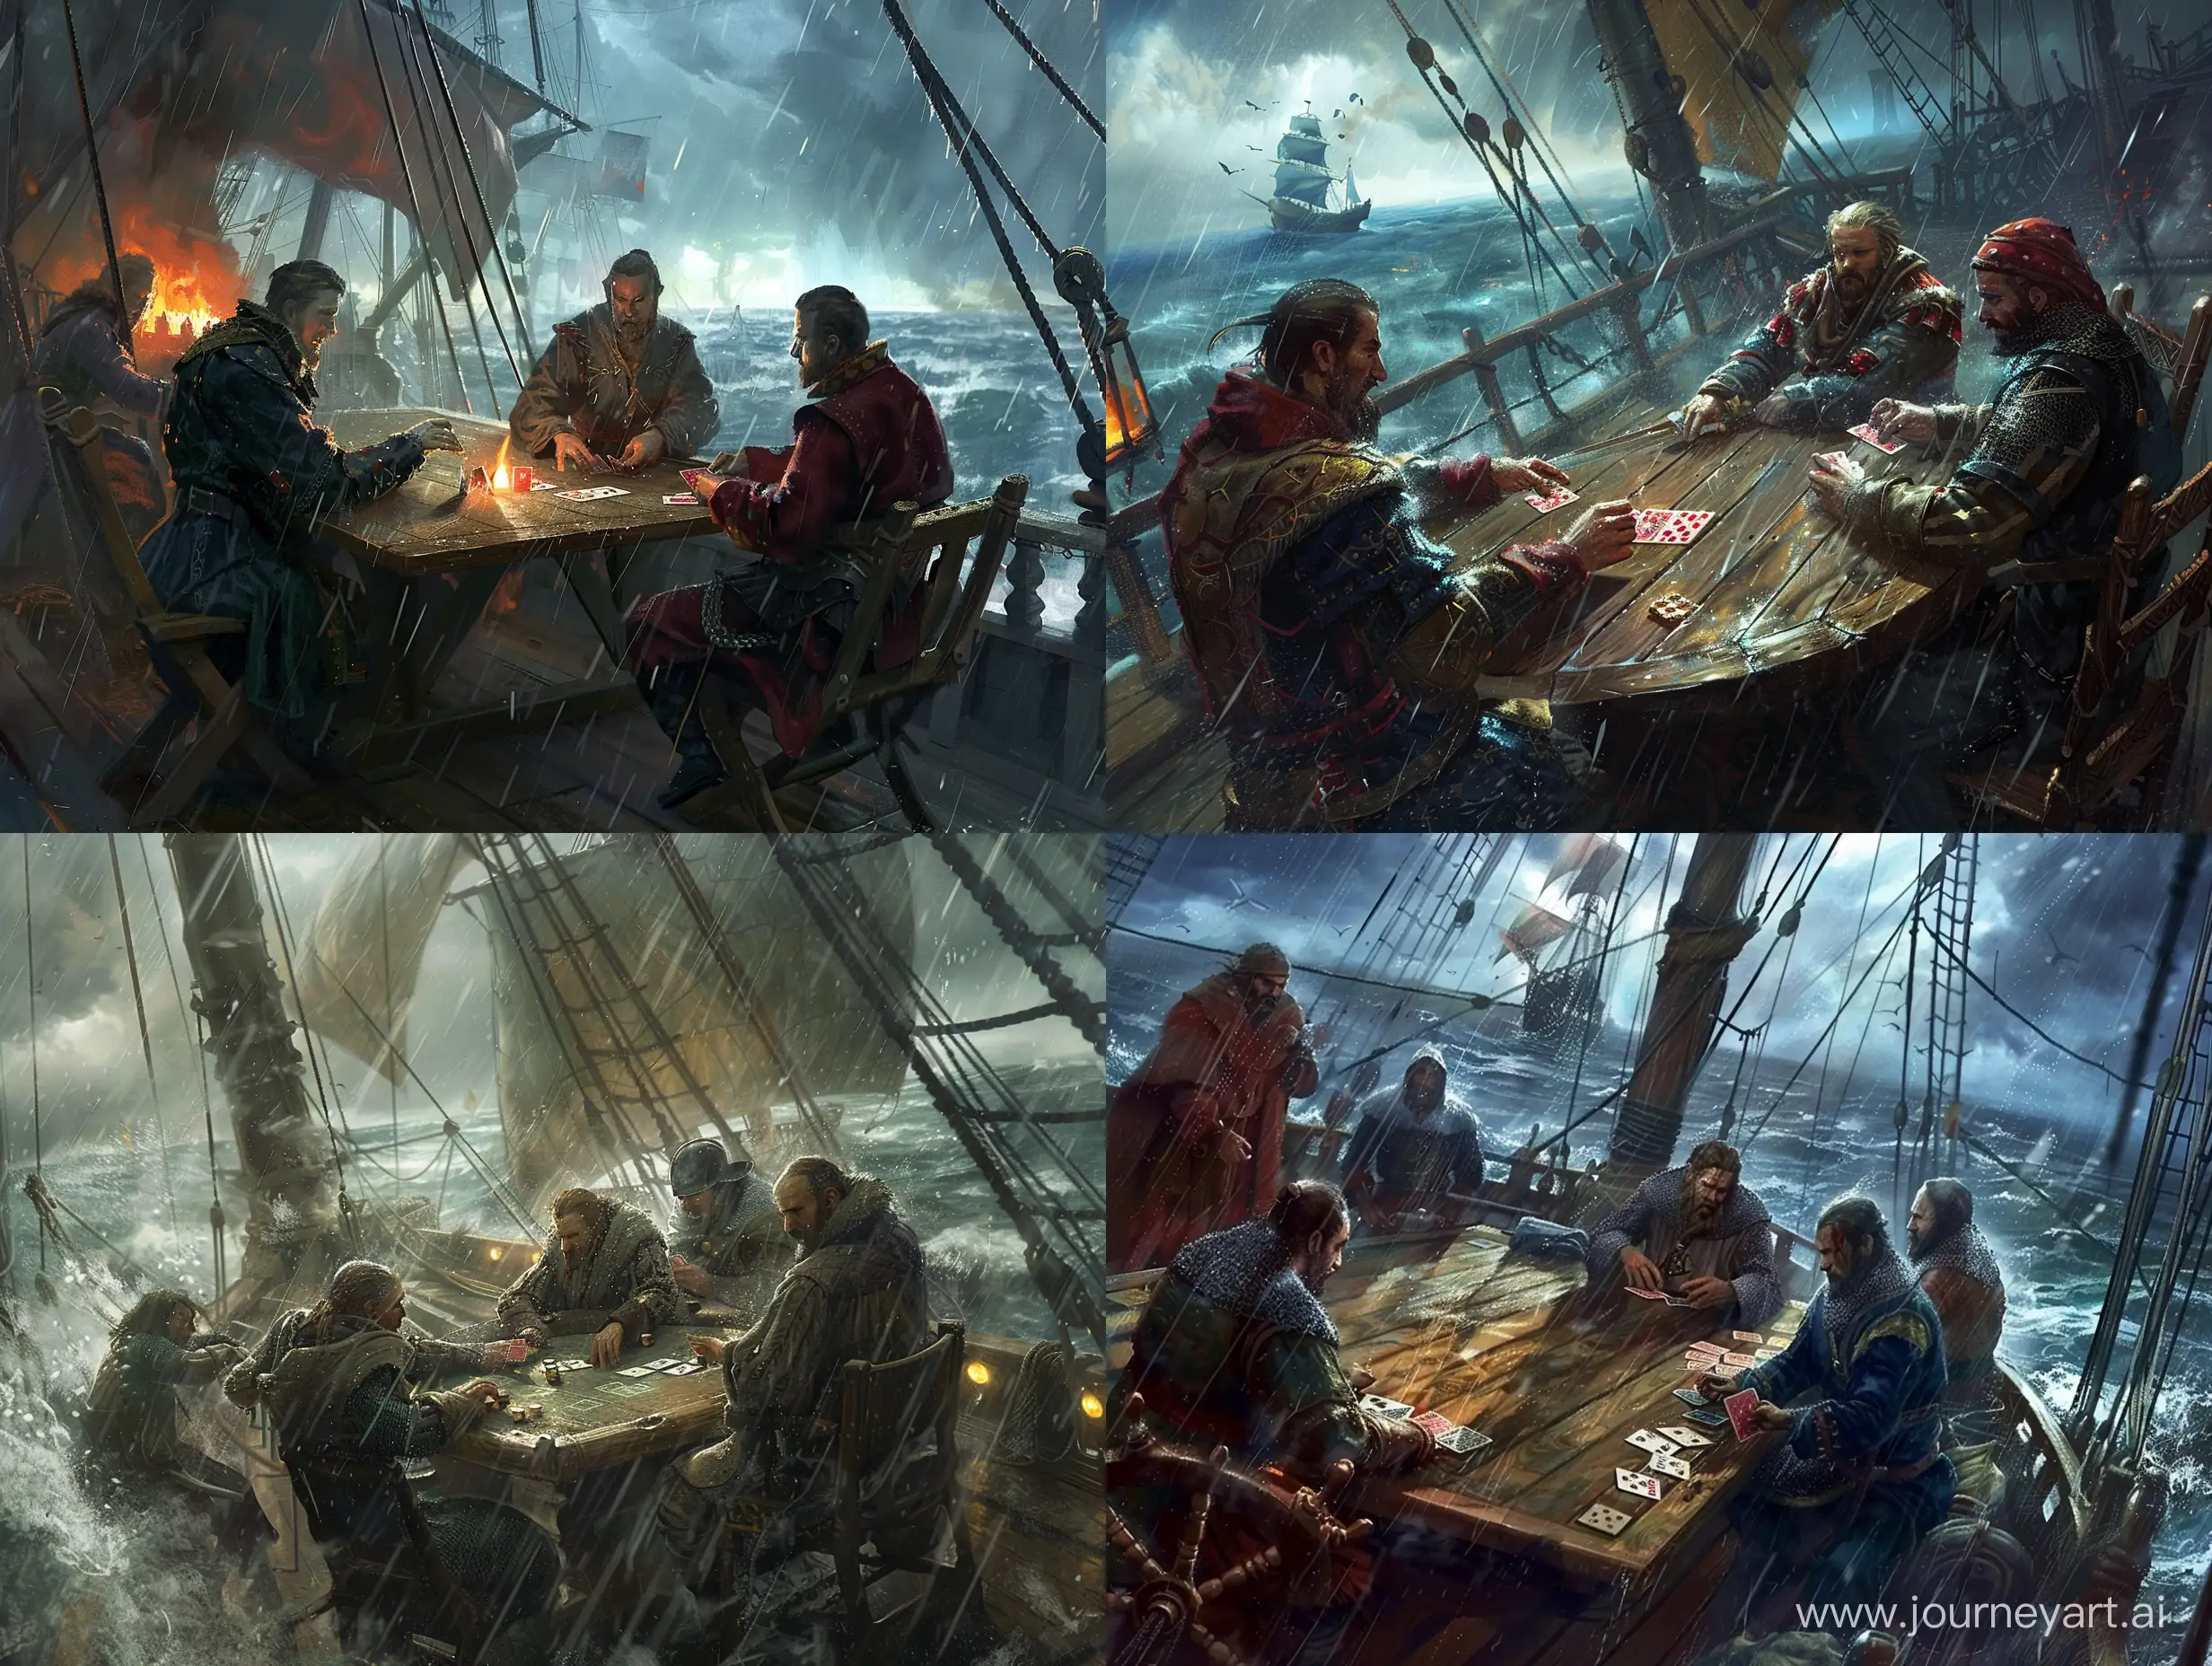 Men-Playing-Cards-on-Deck-of-Medieval-Ship-in-Storm